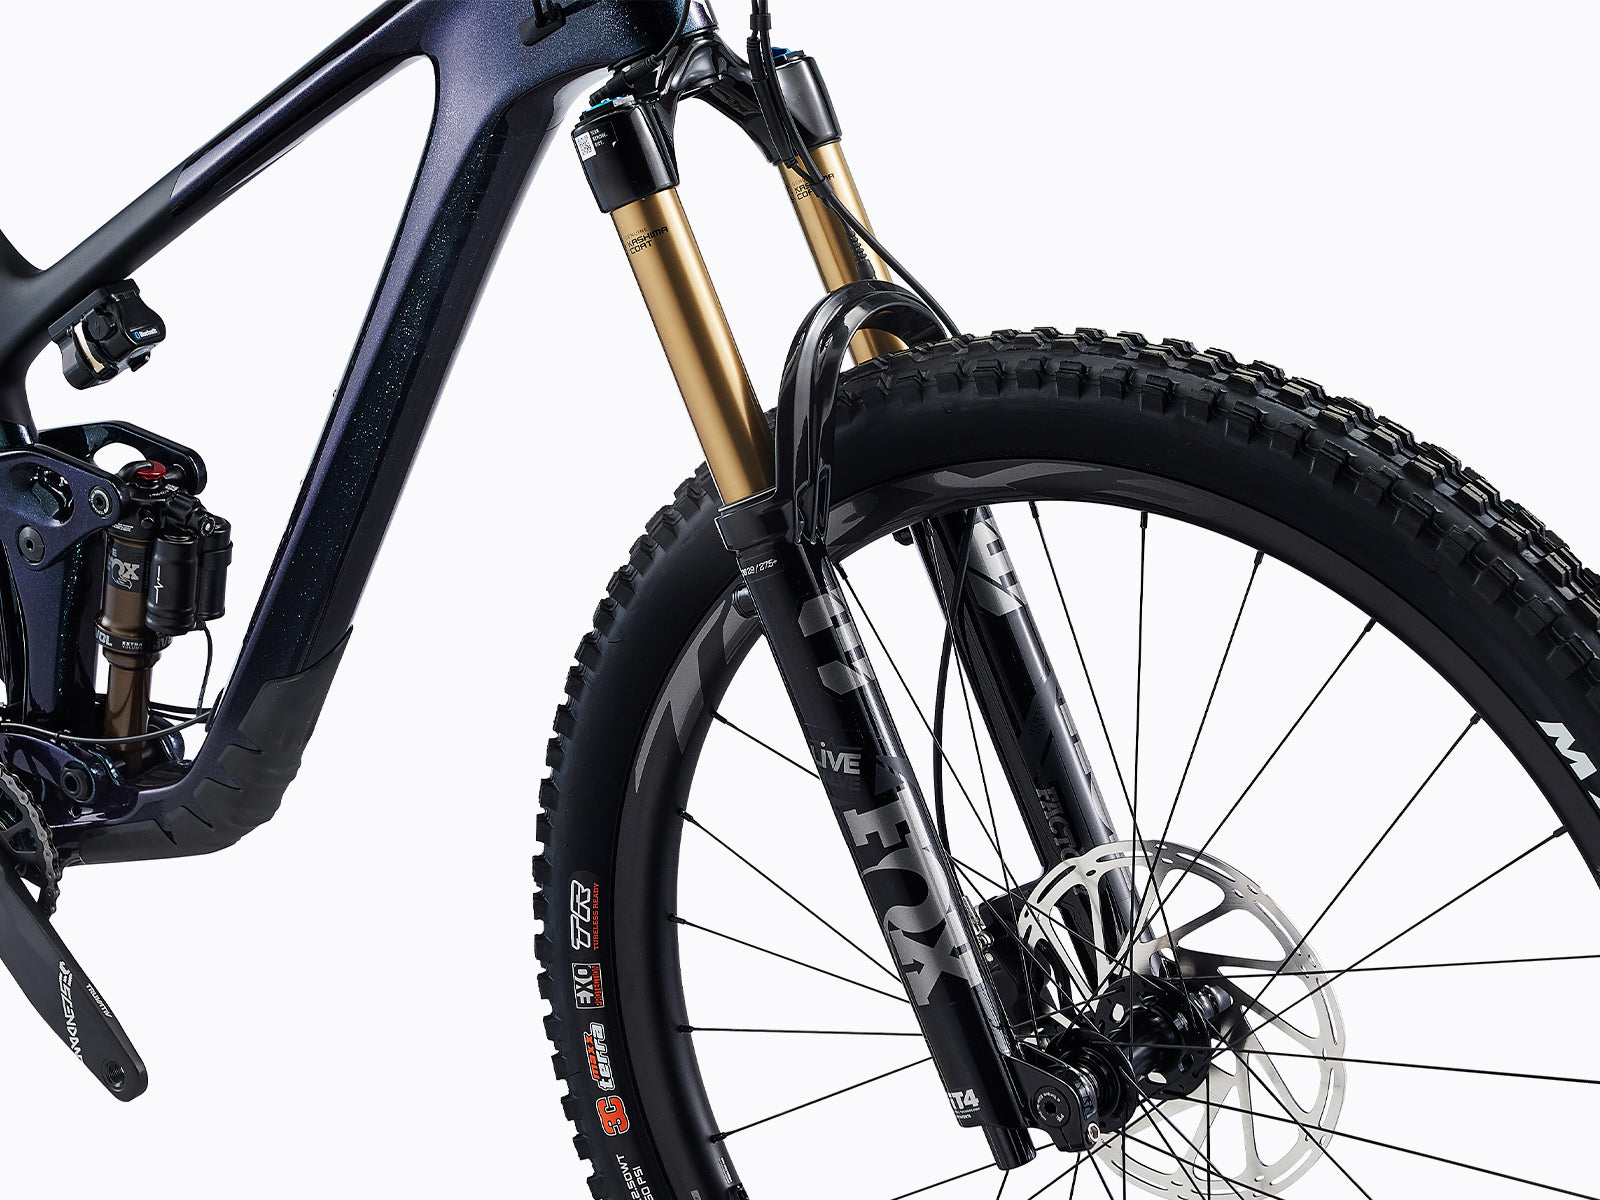 Image features the Giant Trance X Advanced pro 29 1, a fat bike. Now available at Giant Melbourne, an Australian bike shop.